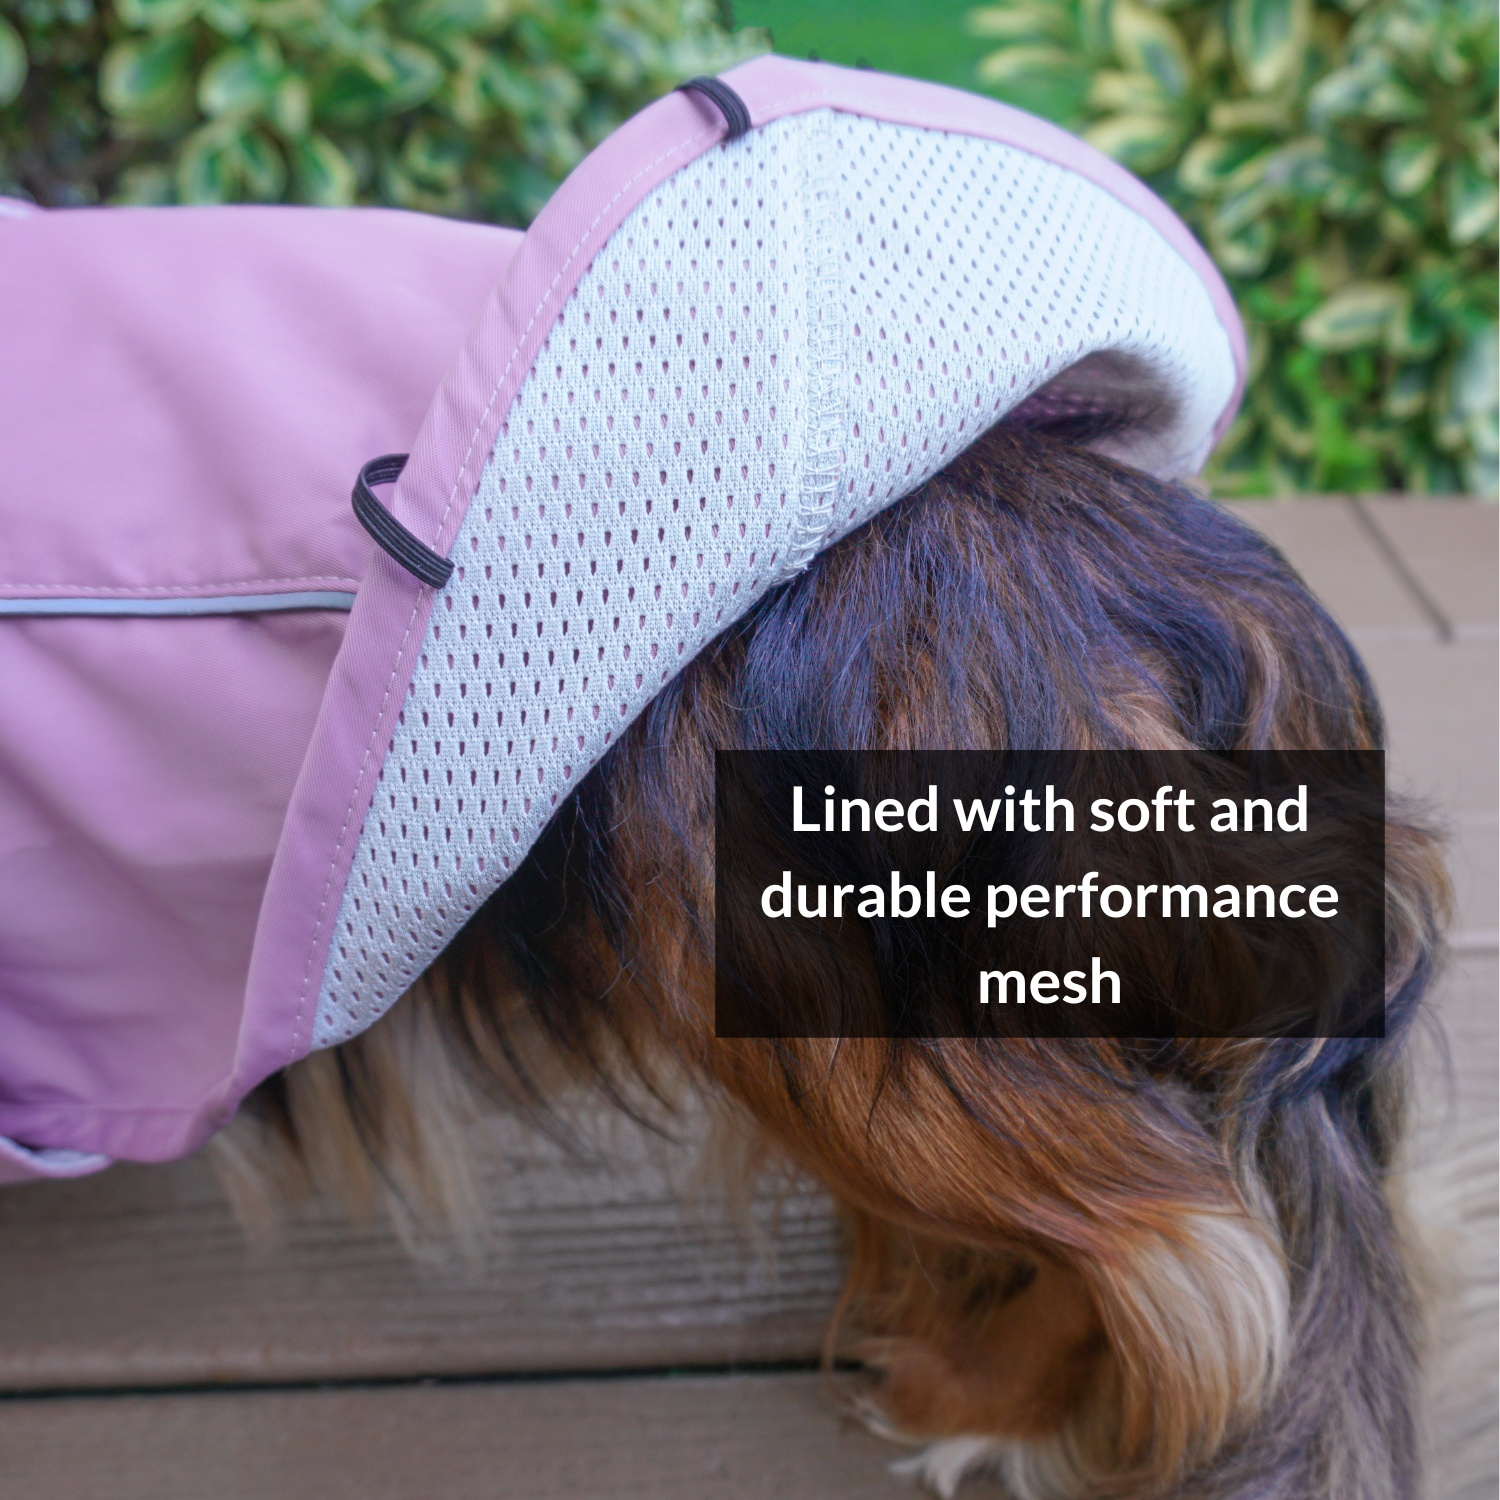 DJANGO City Slicker Dog Jacket and Raincoat - This versatile water-resistant raincoat for dogs is perfect for chilly autumn days, snowy winter walks, and rainy summer showers. Considered the best coat for dachshunds and other dogs that need extra length and coverage, this DJANGO Dog coat features a spacious, no-leak leash portal and reflective piping for low-light adventures. Whether you are looking for the best dog winter coat or an extra long dog raincoat, this one is for you! - djangobrand.com